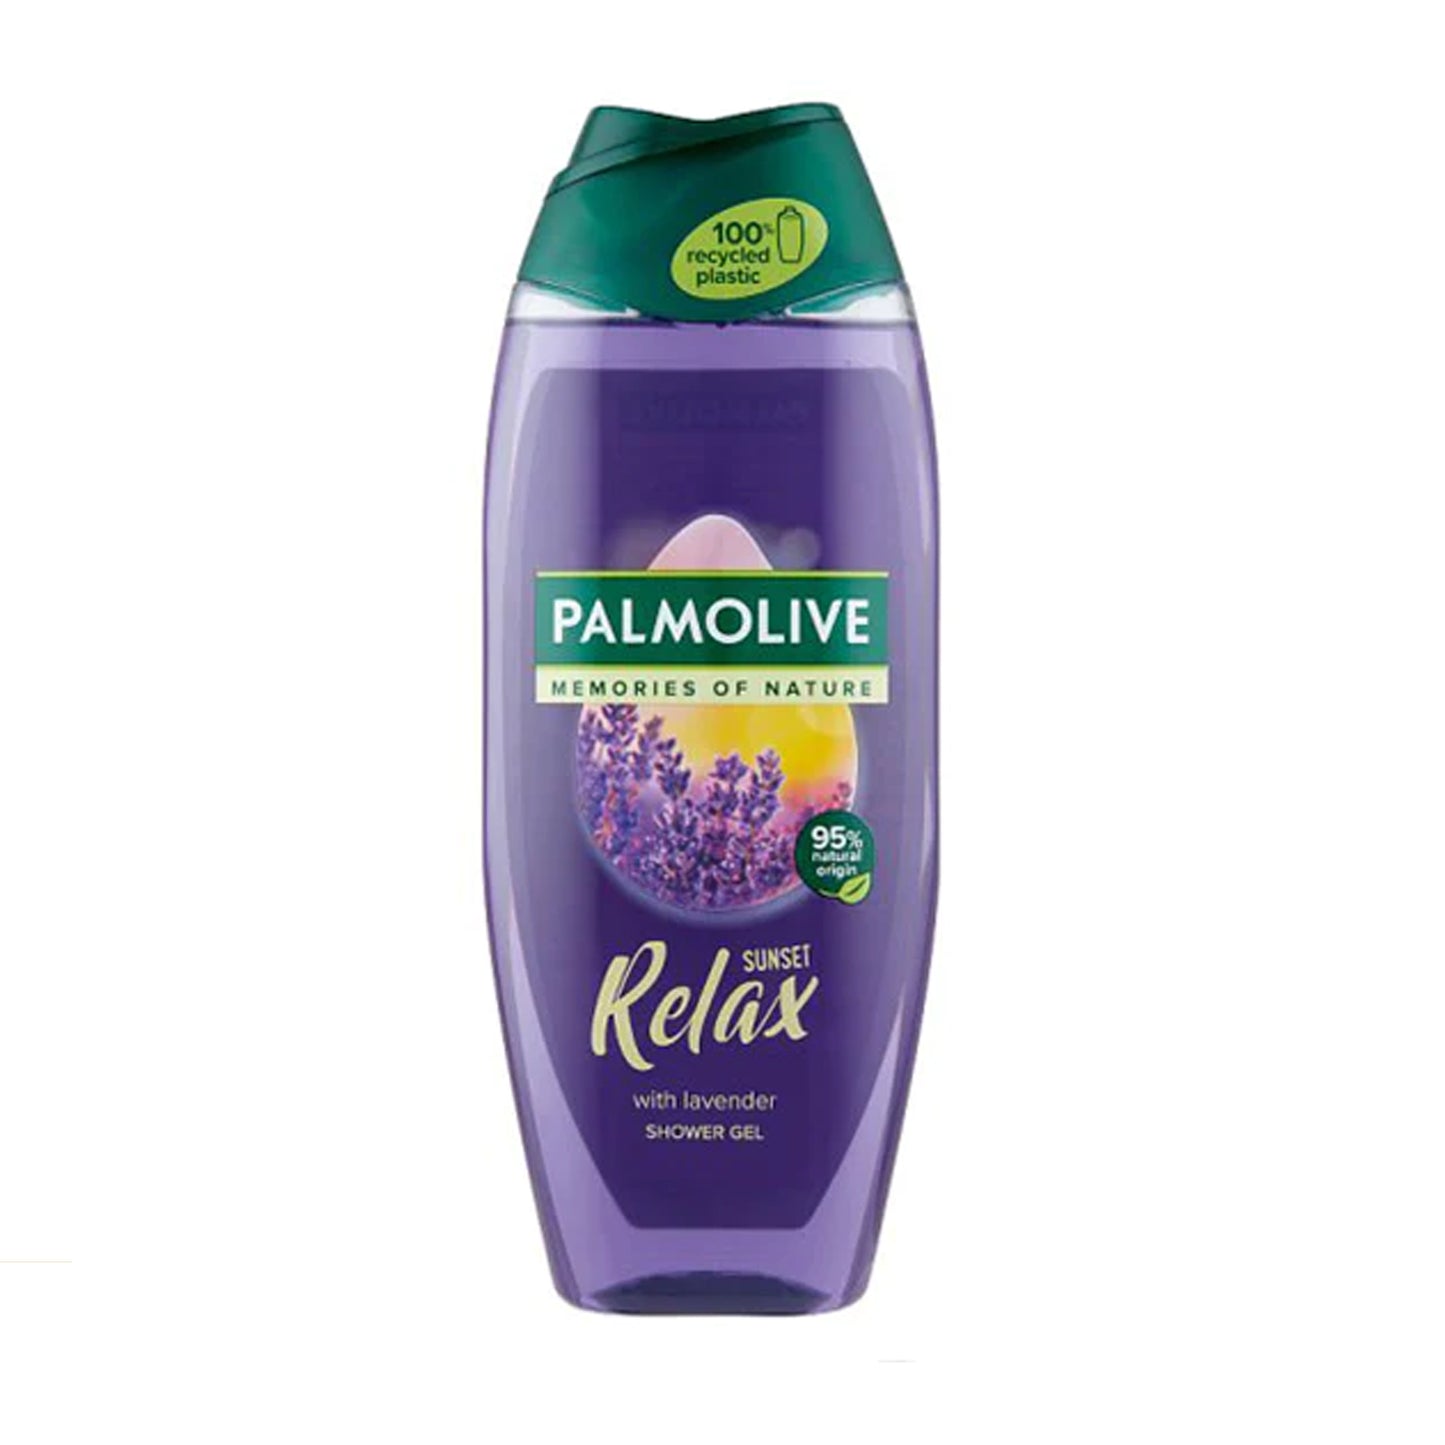 PALMOLIVE - SUNSET RELAX WITH LAVENDER SHOWER GEL - 400ML